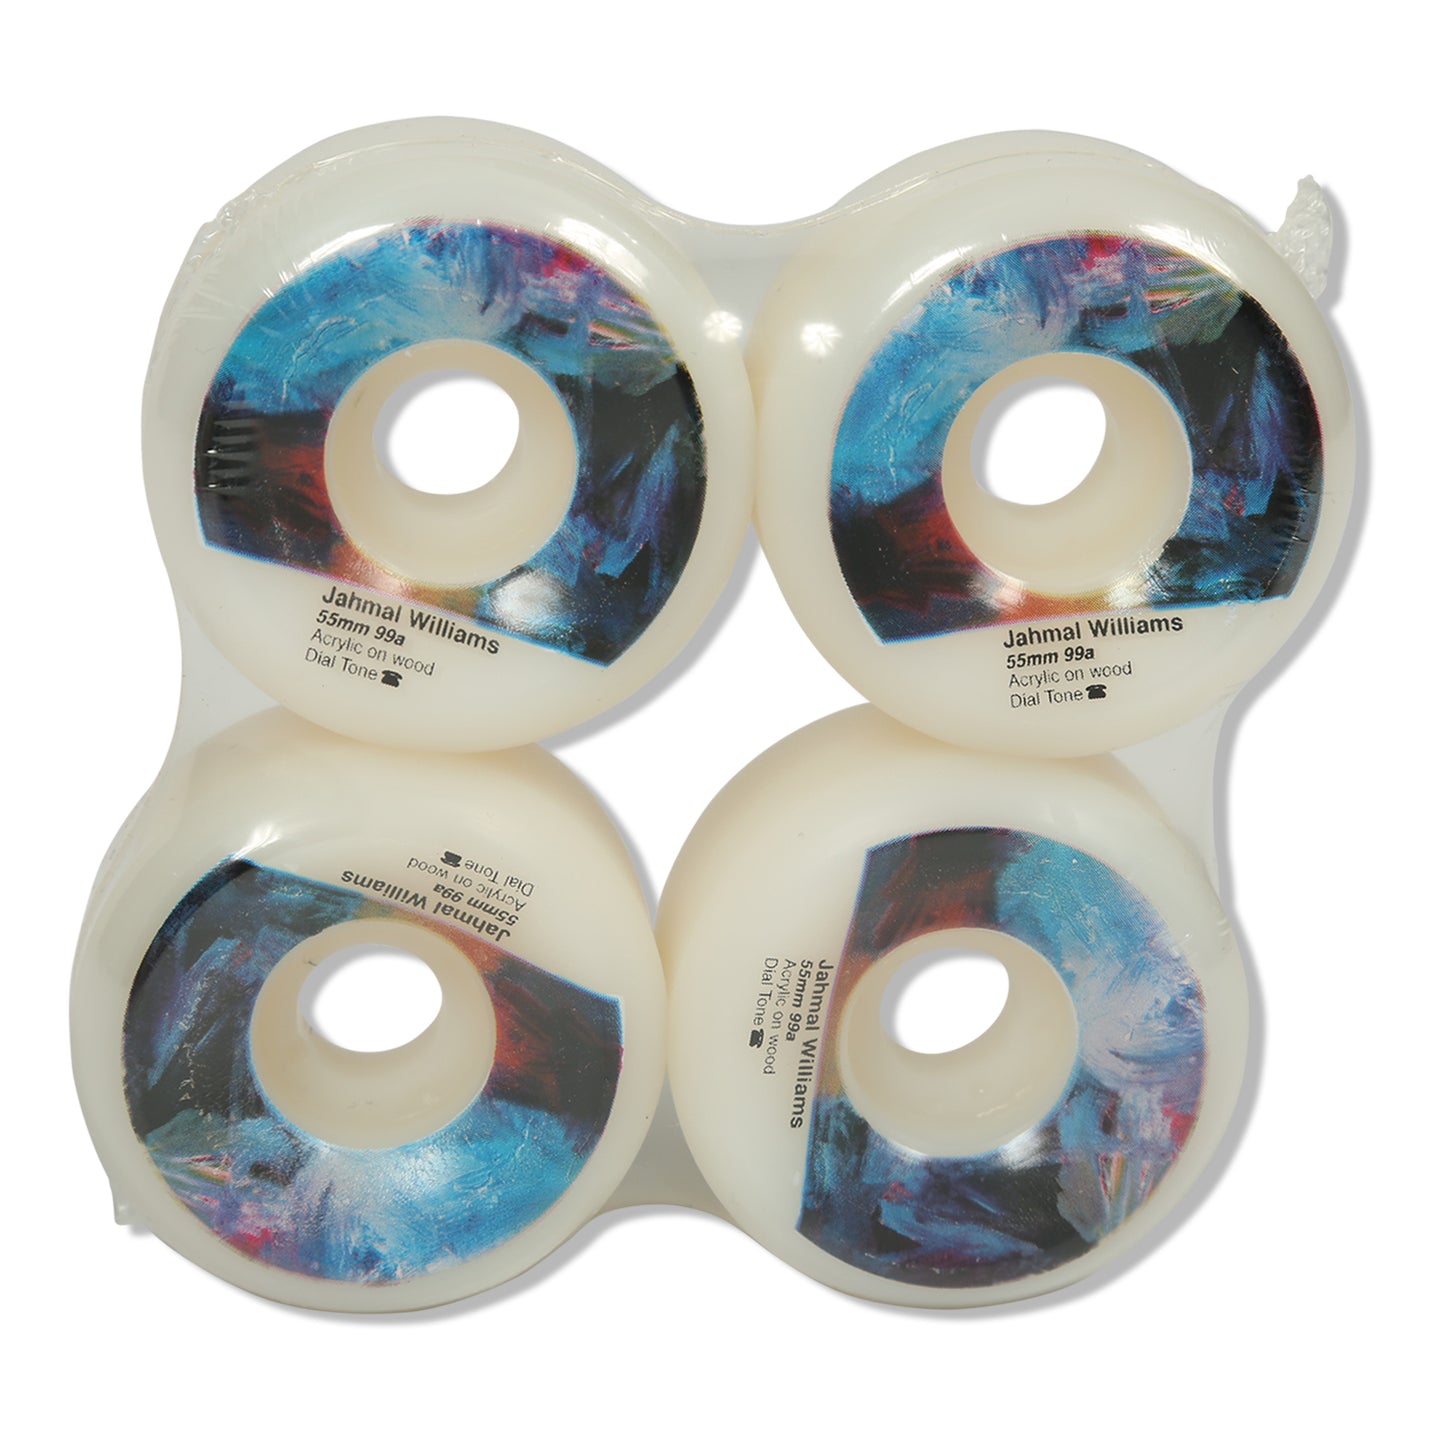 DIAL TONE Williams Acrylic Conical Wheels 55mm/99a